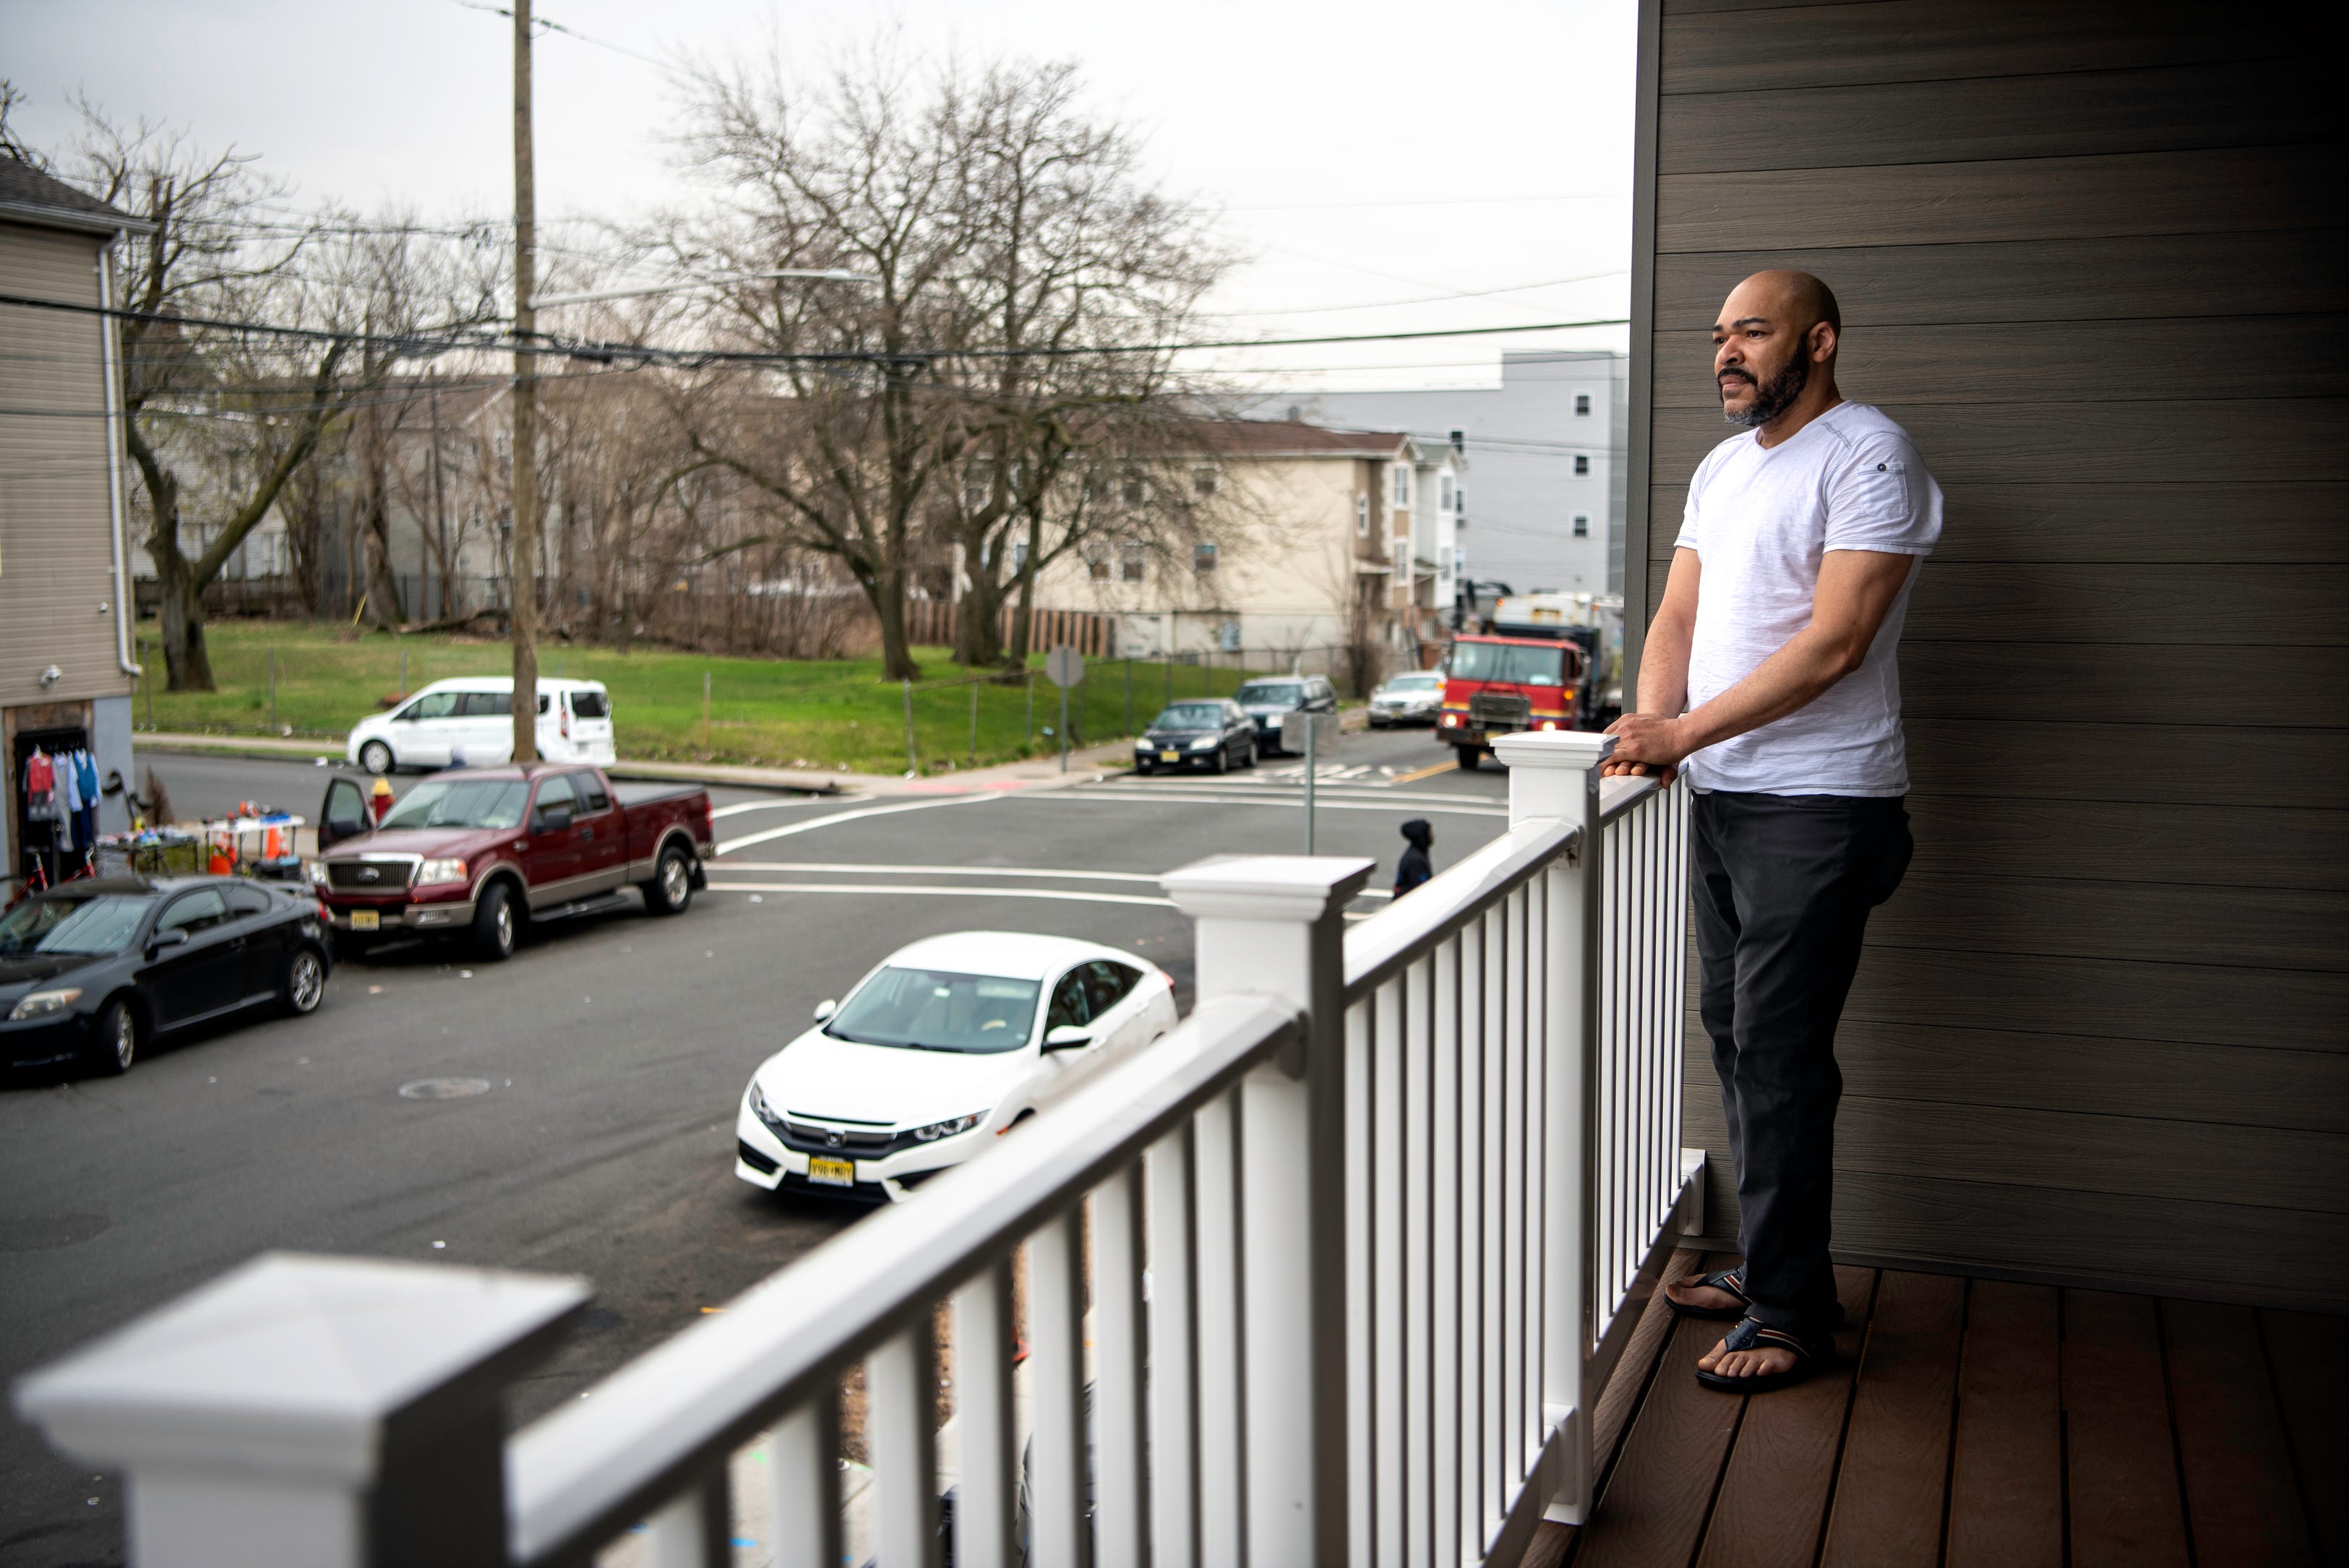 Andres Diaz takes in the view of Hamilton Ave.